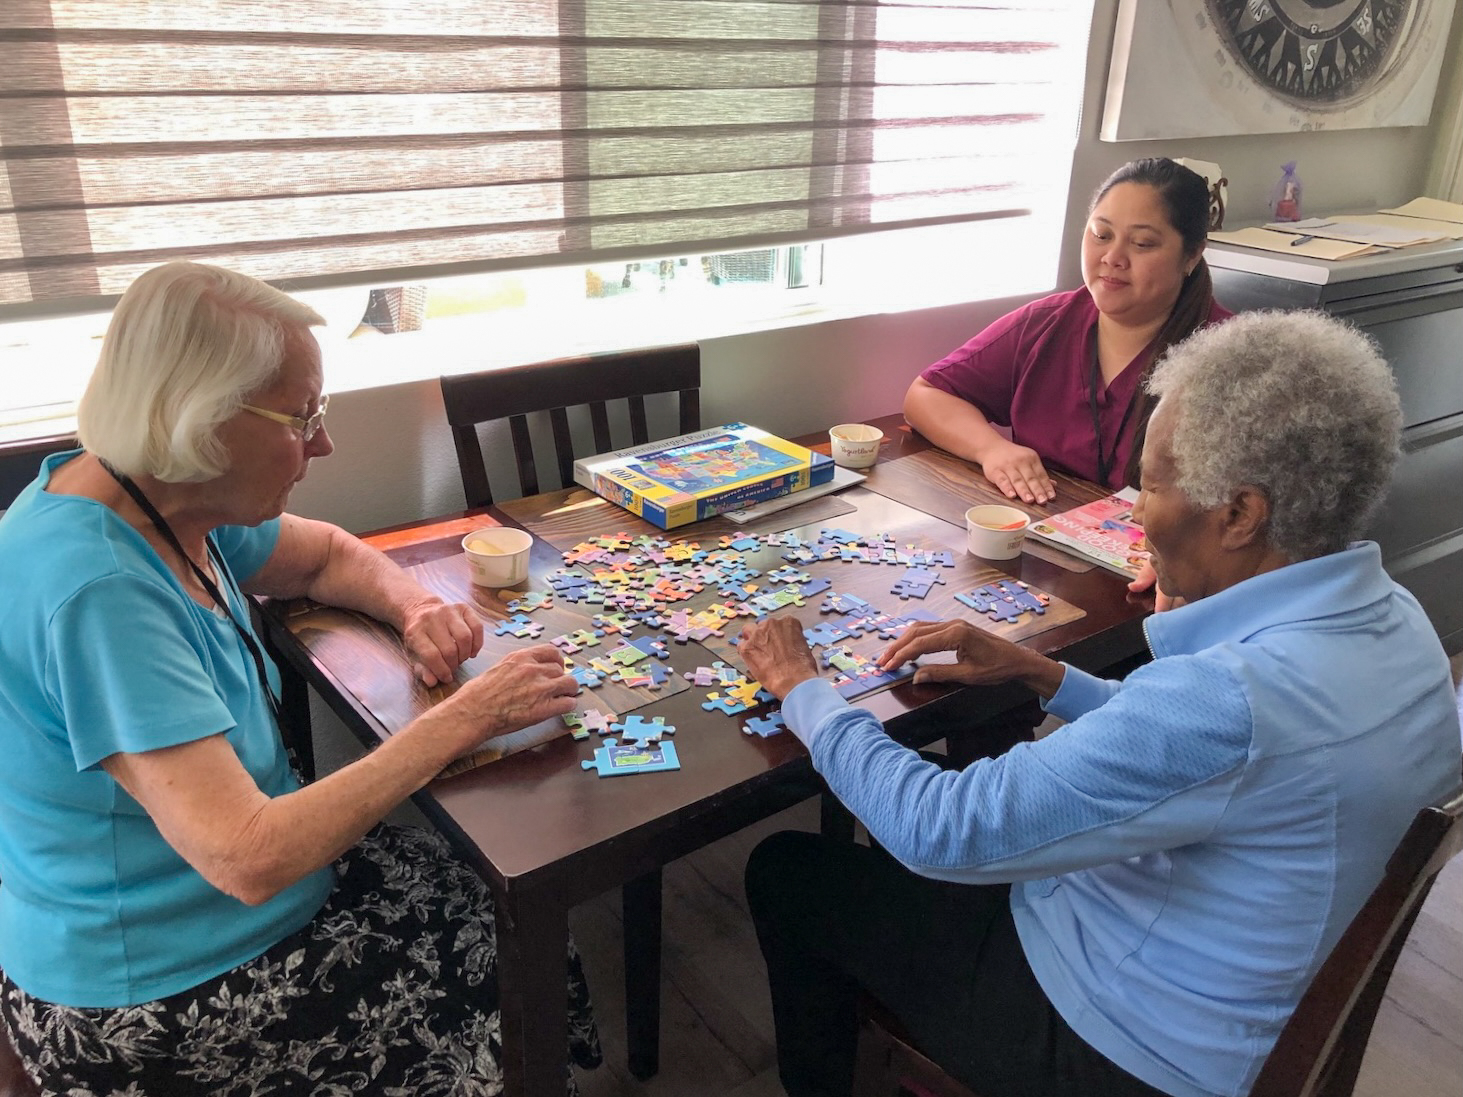 Residents completing a jigsaw puzzle